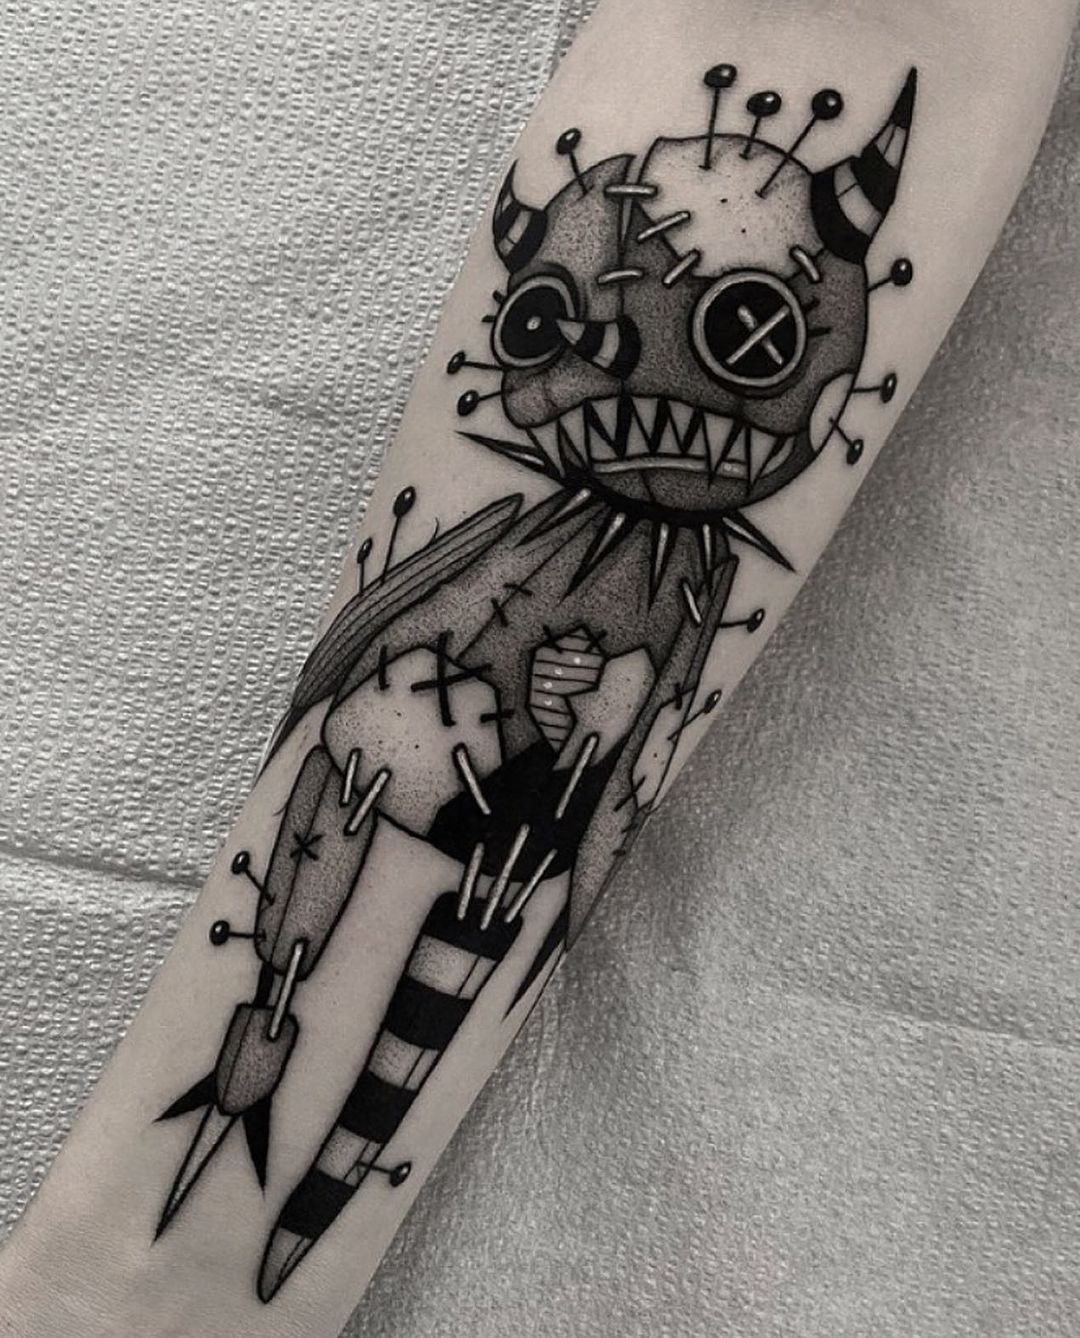 voodoo doll tattoo by steph.guillotine